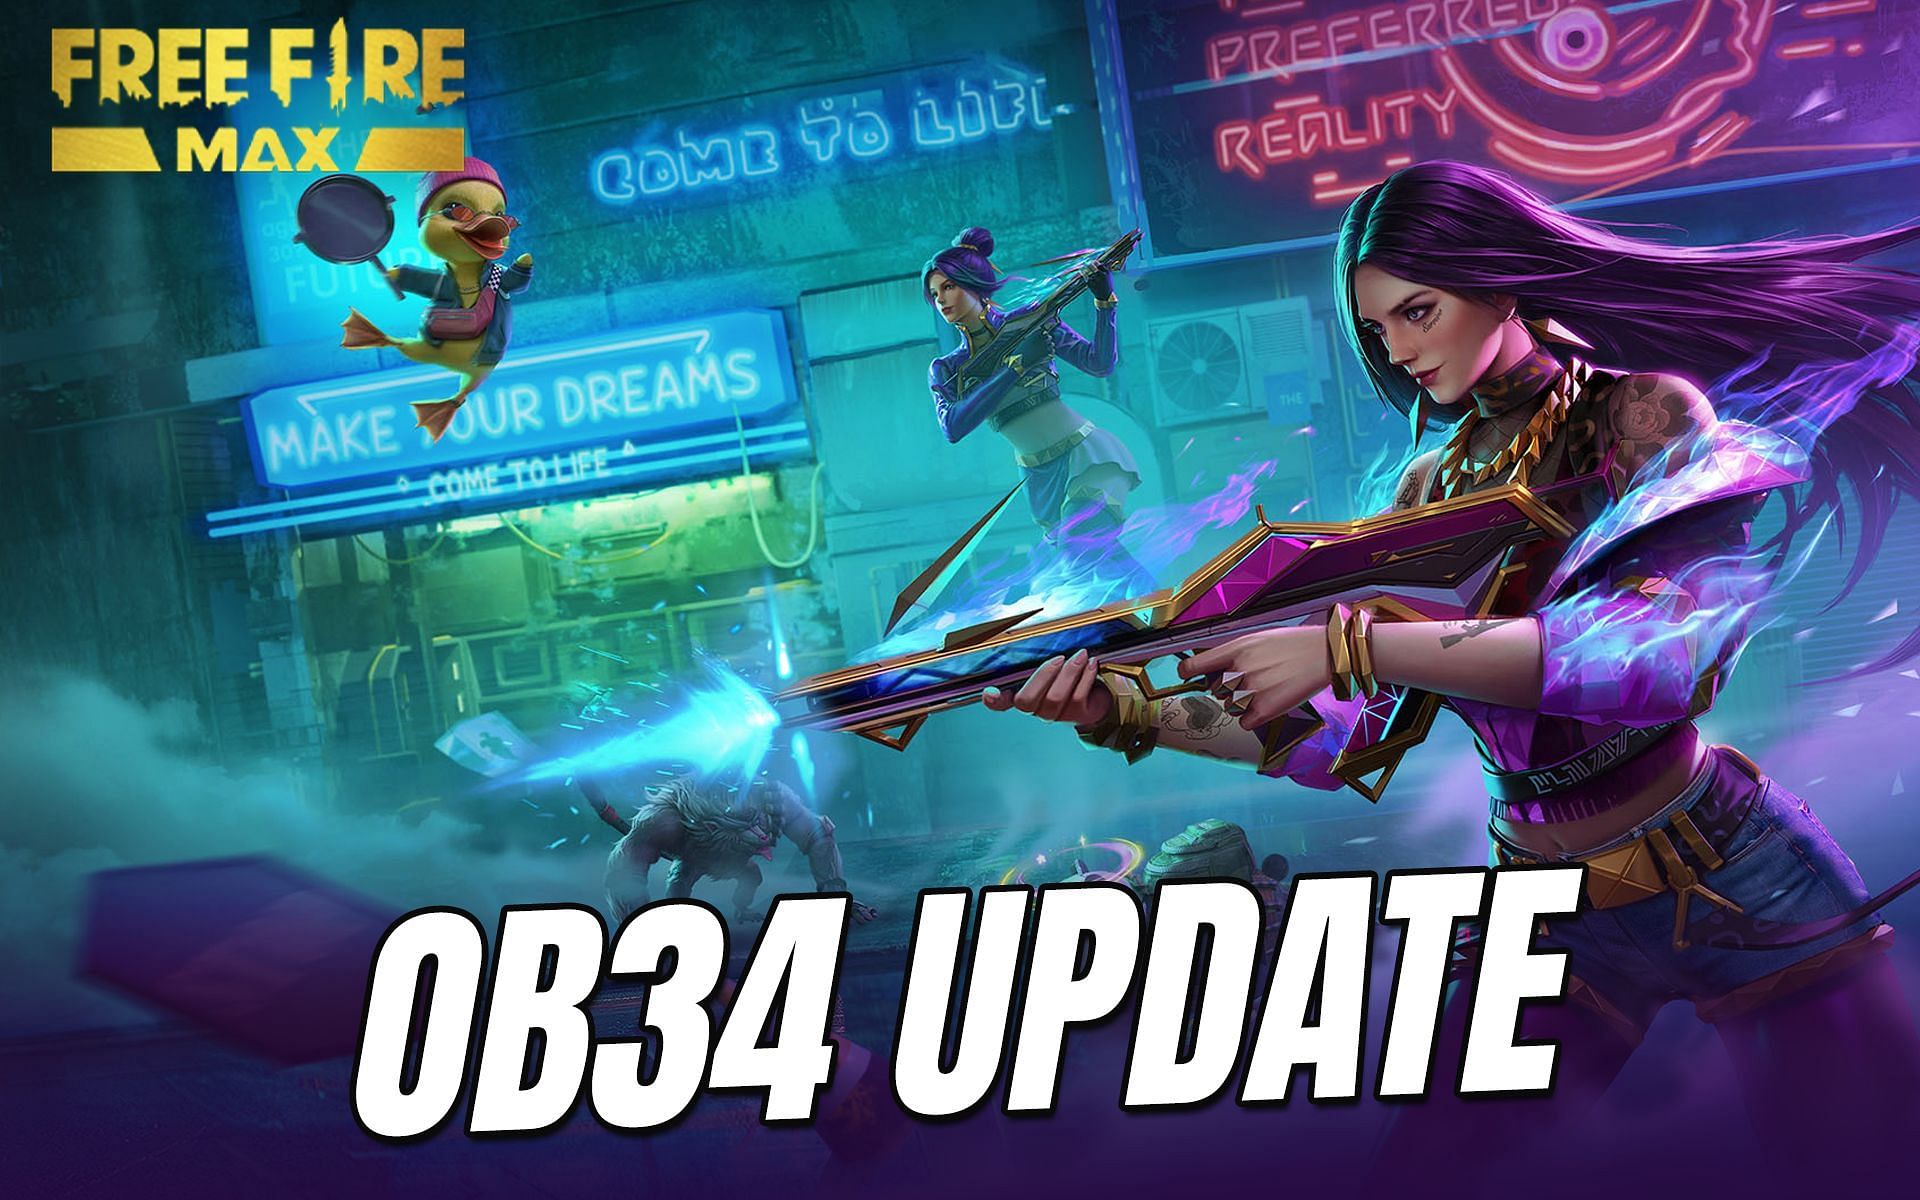 The OB34 update of the game will be released today (Image via Sportskeeda)